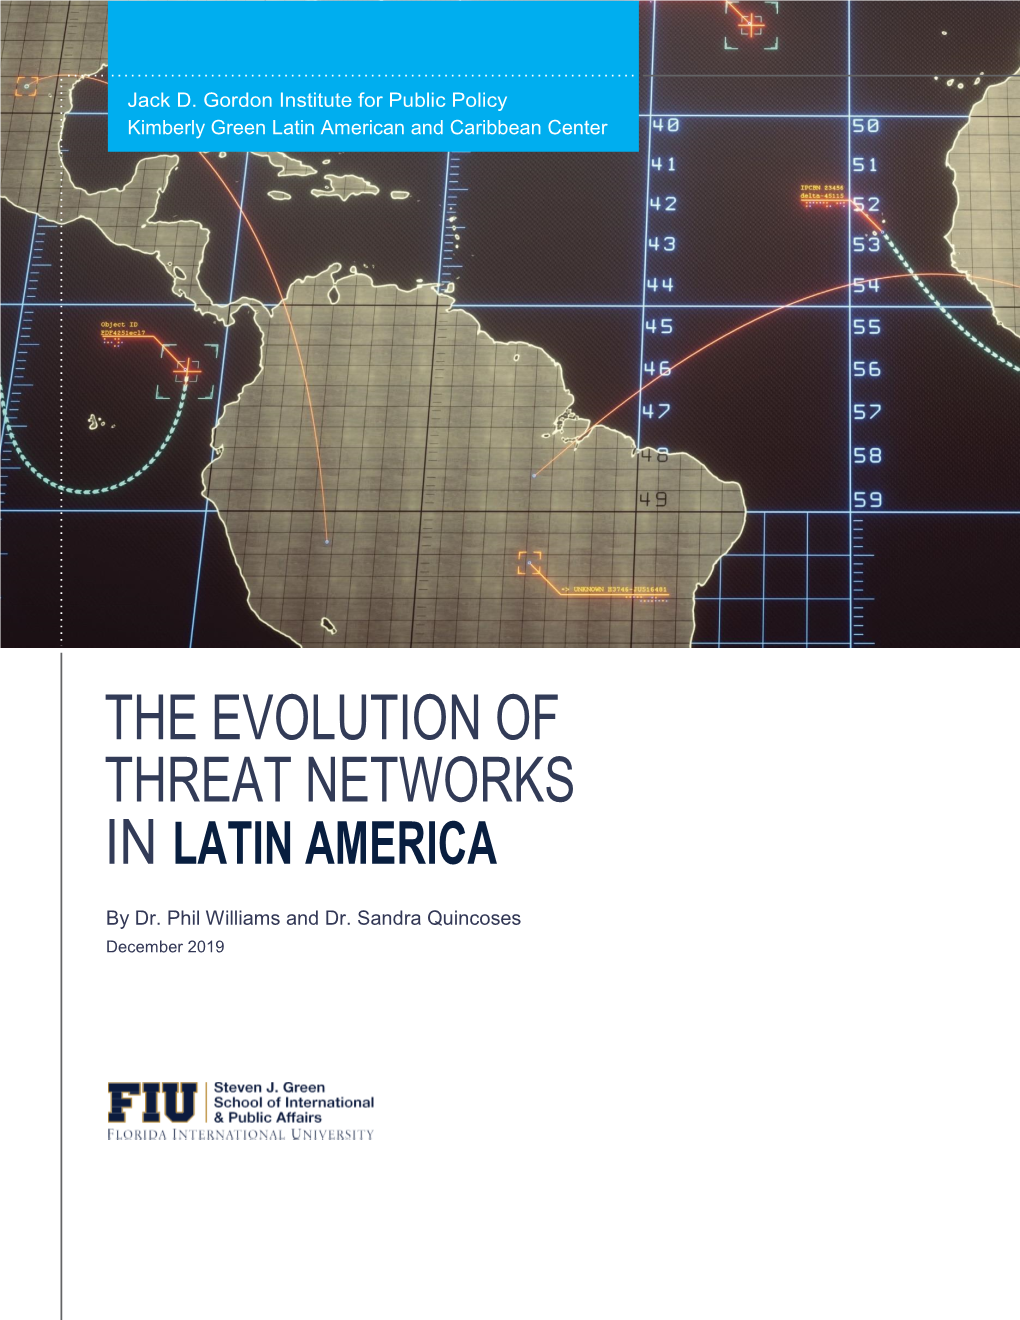 The Evolution of Threat Networks in Latin America